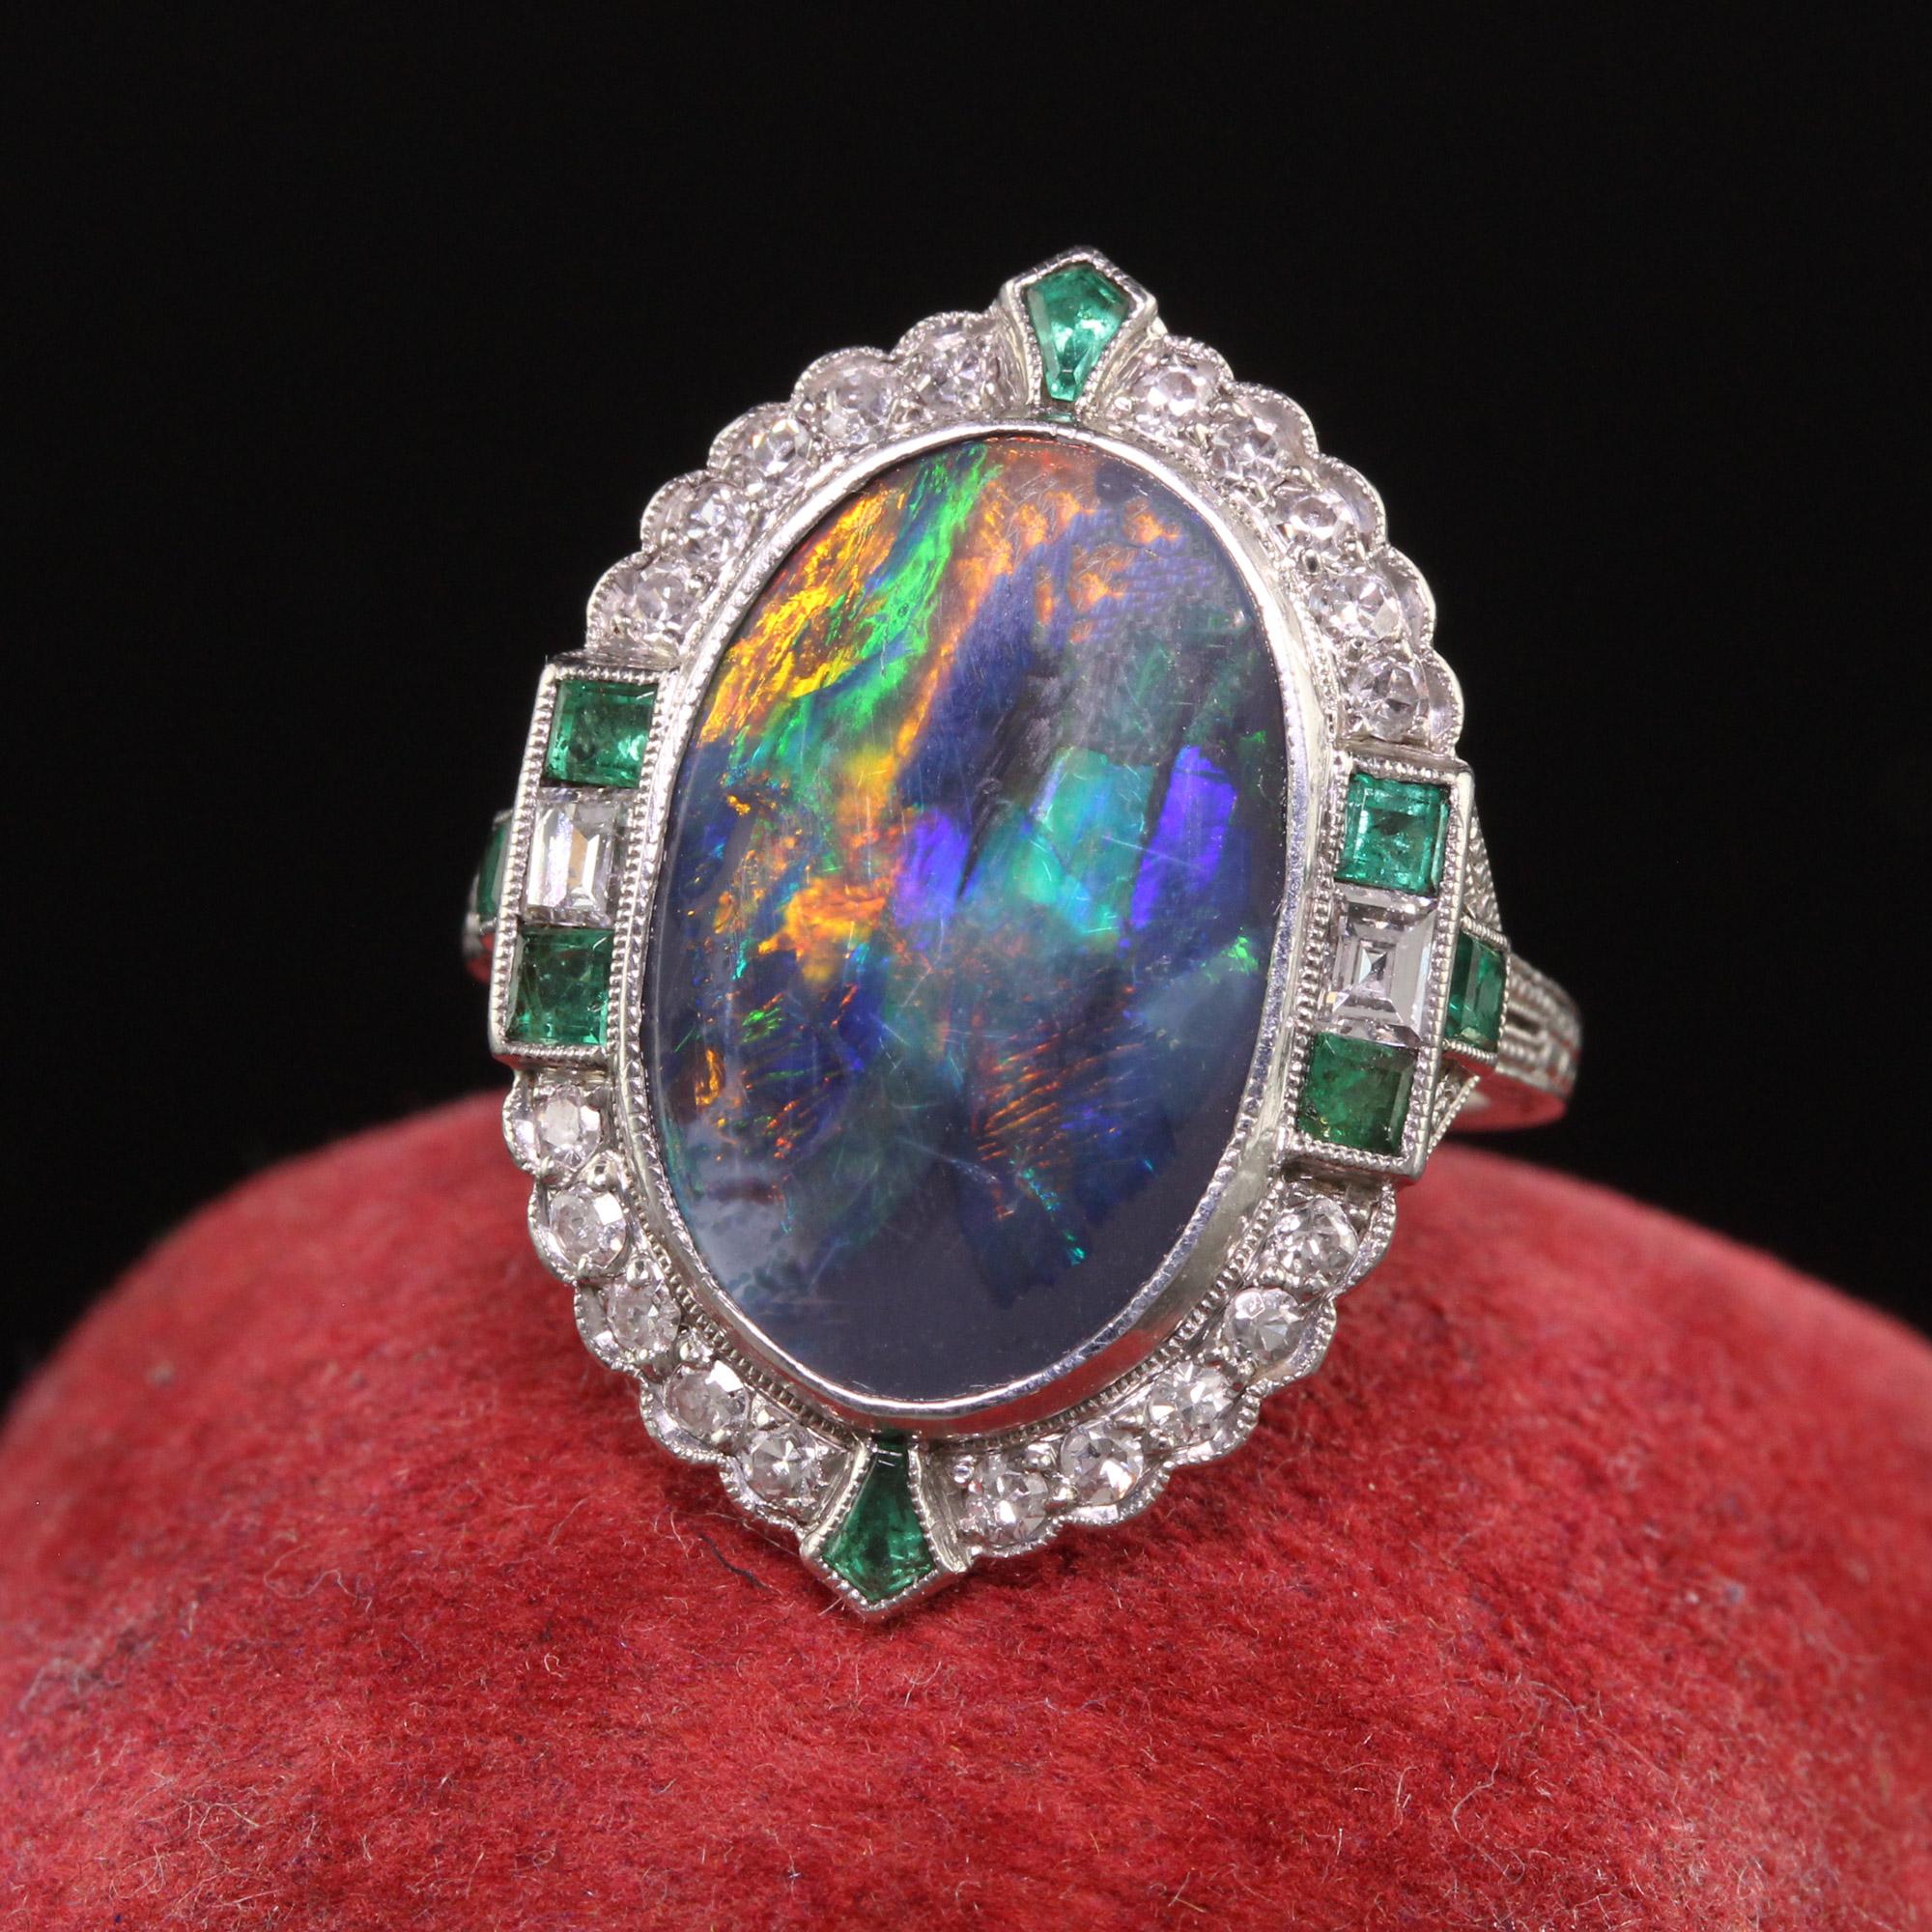 Beautiful Antique Art Deco Platinum Black Opal Diamond and Emerald Cocktail Ring. This gorgeous ring is crafted in platinum. The center holds an unbelievable black opal with a full play of color between red, blue, green, and orange. There are also